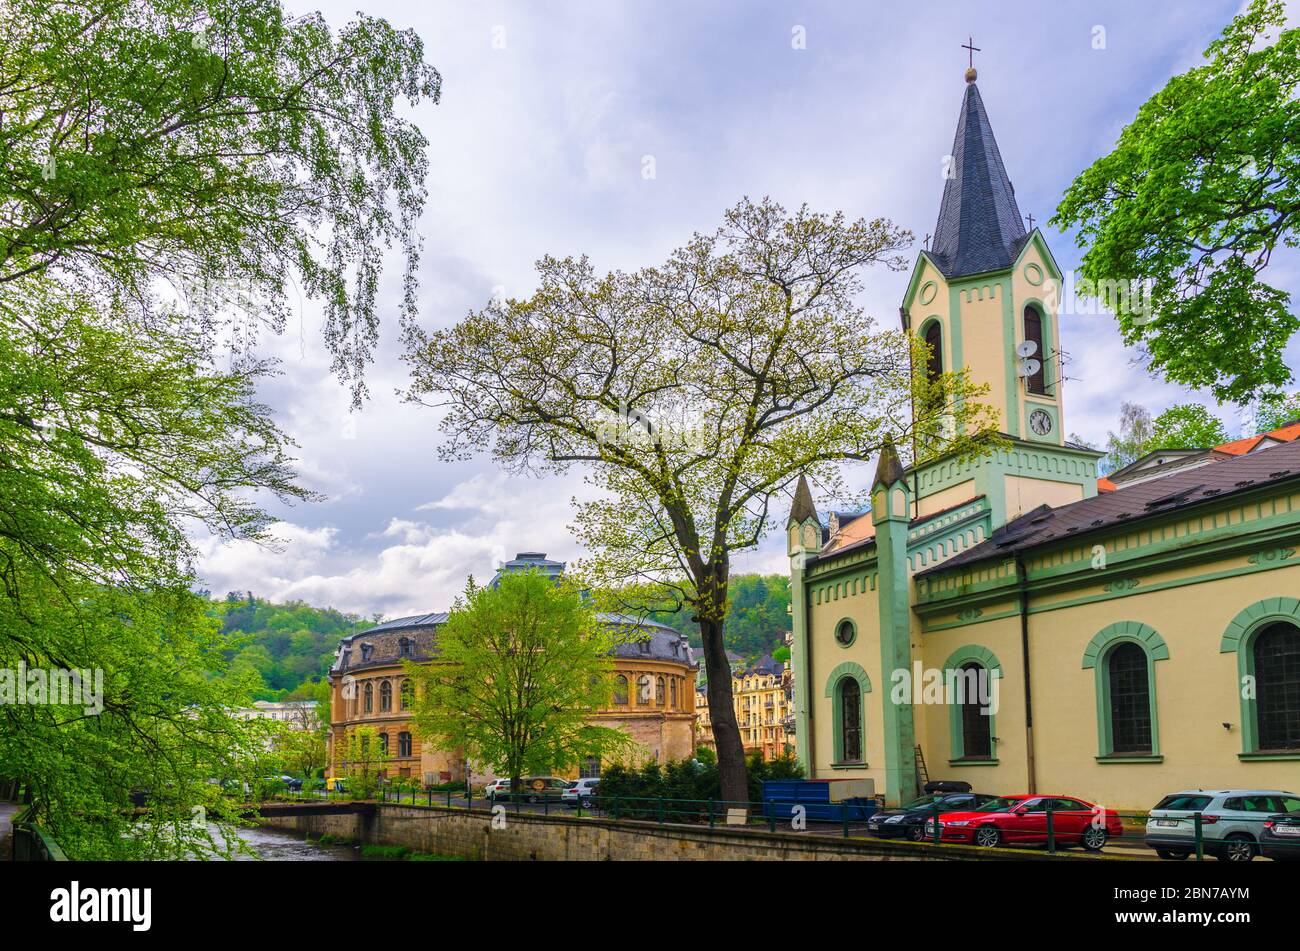 Karlovy Vary, Czech Republic, May 11, 2019: St. Peter and Paul church and Kaiserbad Spa Imperial Bath or Lazne I, Tepla river embankment in Carlsbad historical city centre, West Bohemia Stock Photo